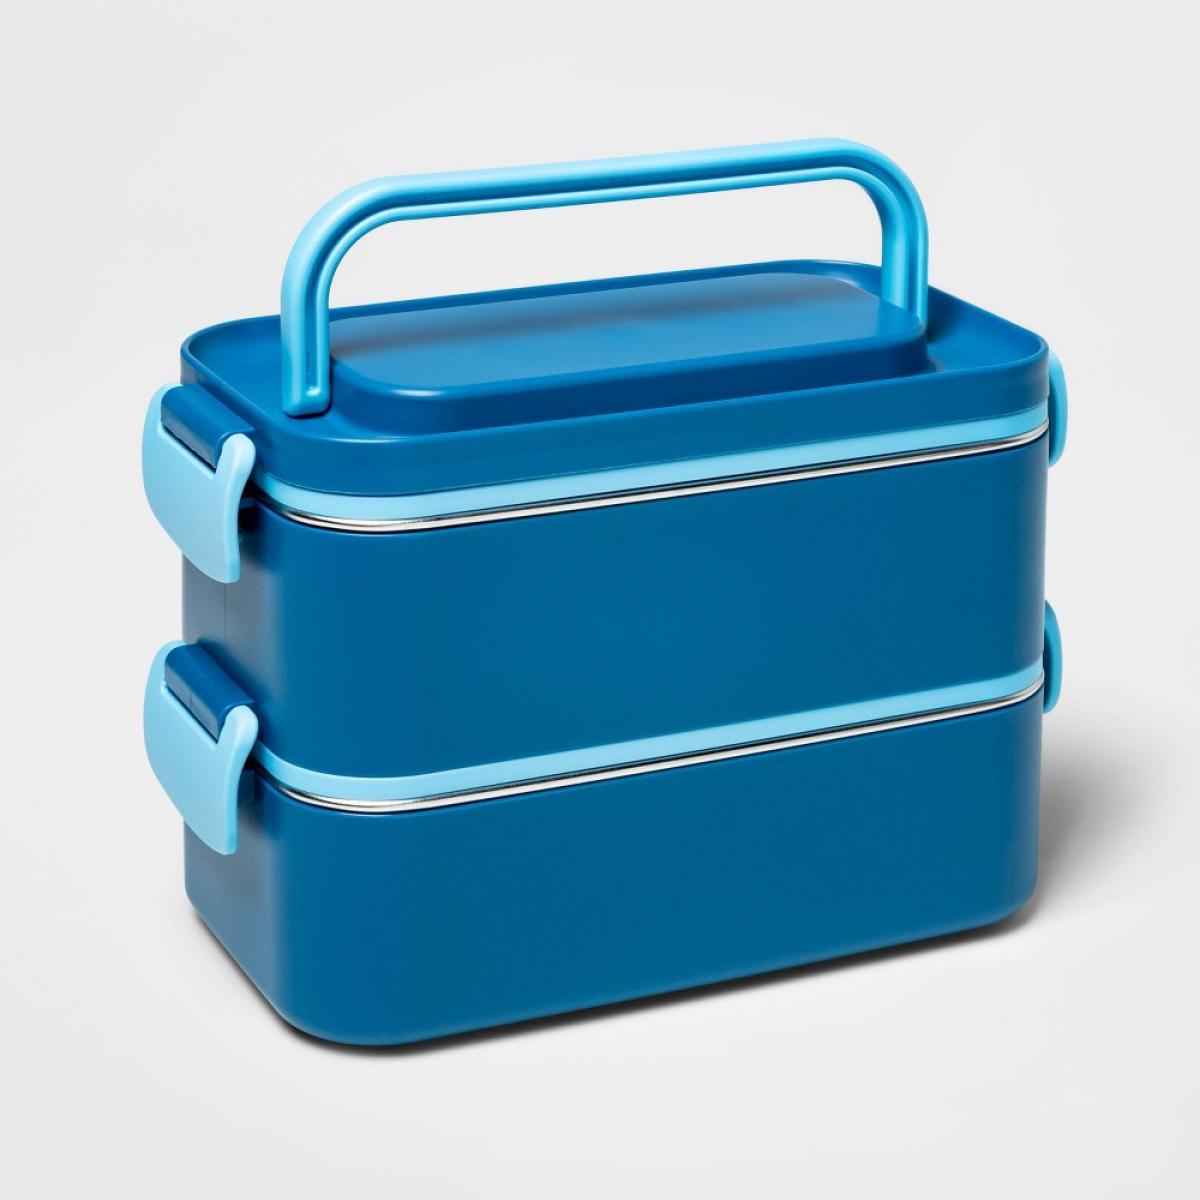 Two Compartment Stainless Steel Container - 28oz / Cosmic Blue Lid